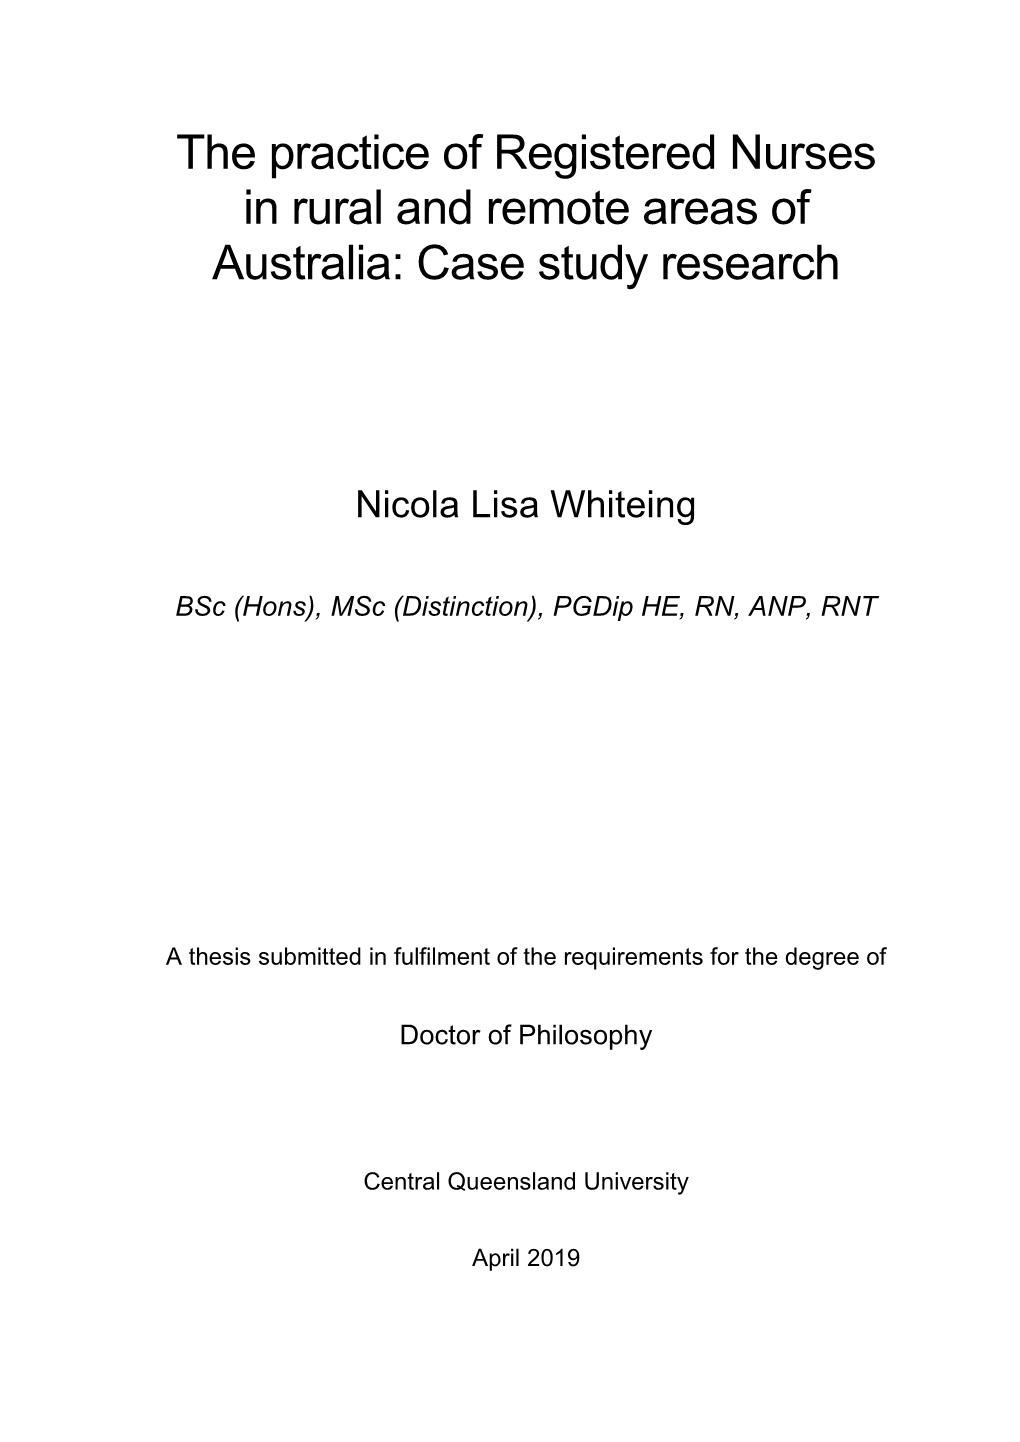 The Practice of Registered Nurses in Rural and Remote Areas of Australia: Case Study Research